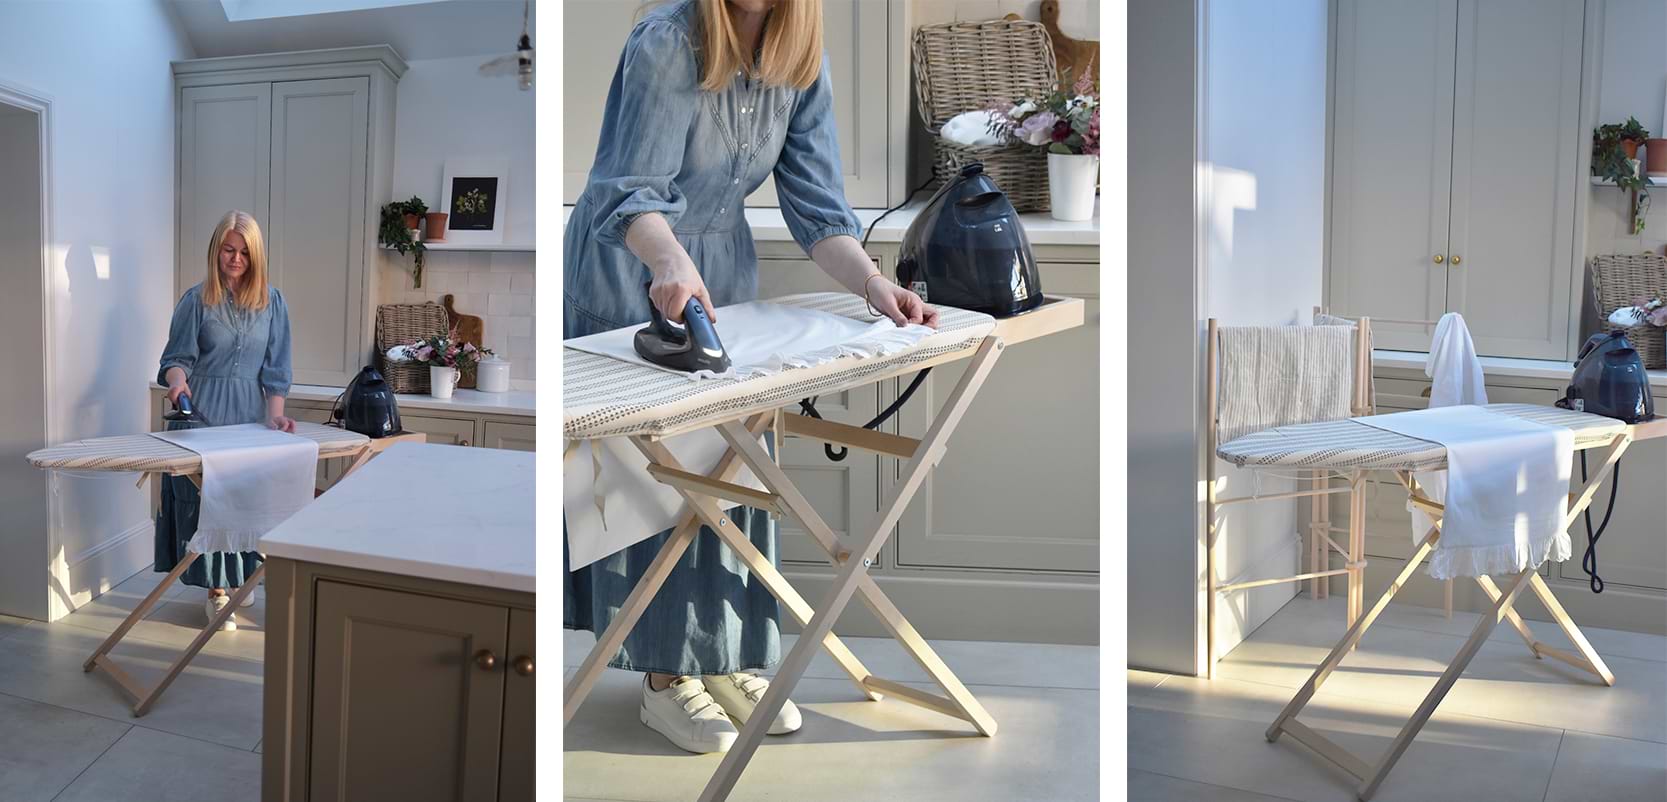 Lady using a wooden ironing board and clothes drying on a zigzag wooden clothes dryer